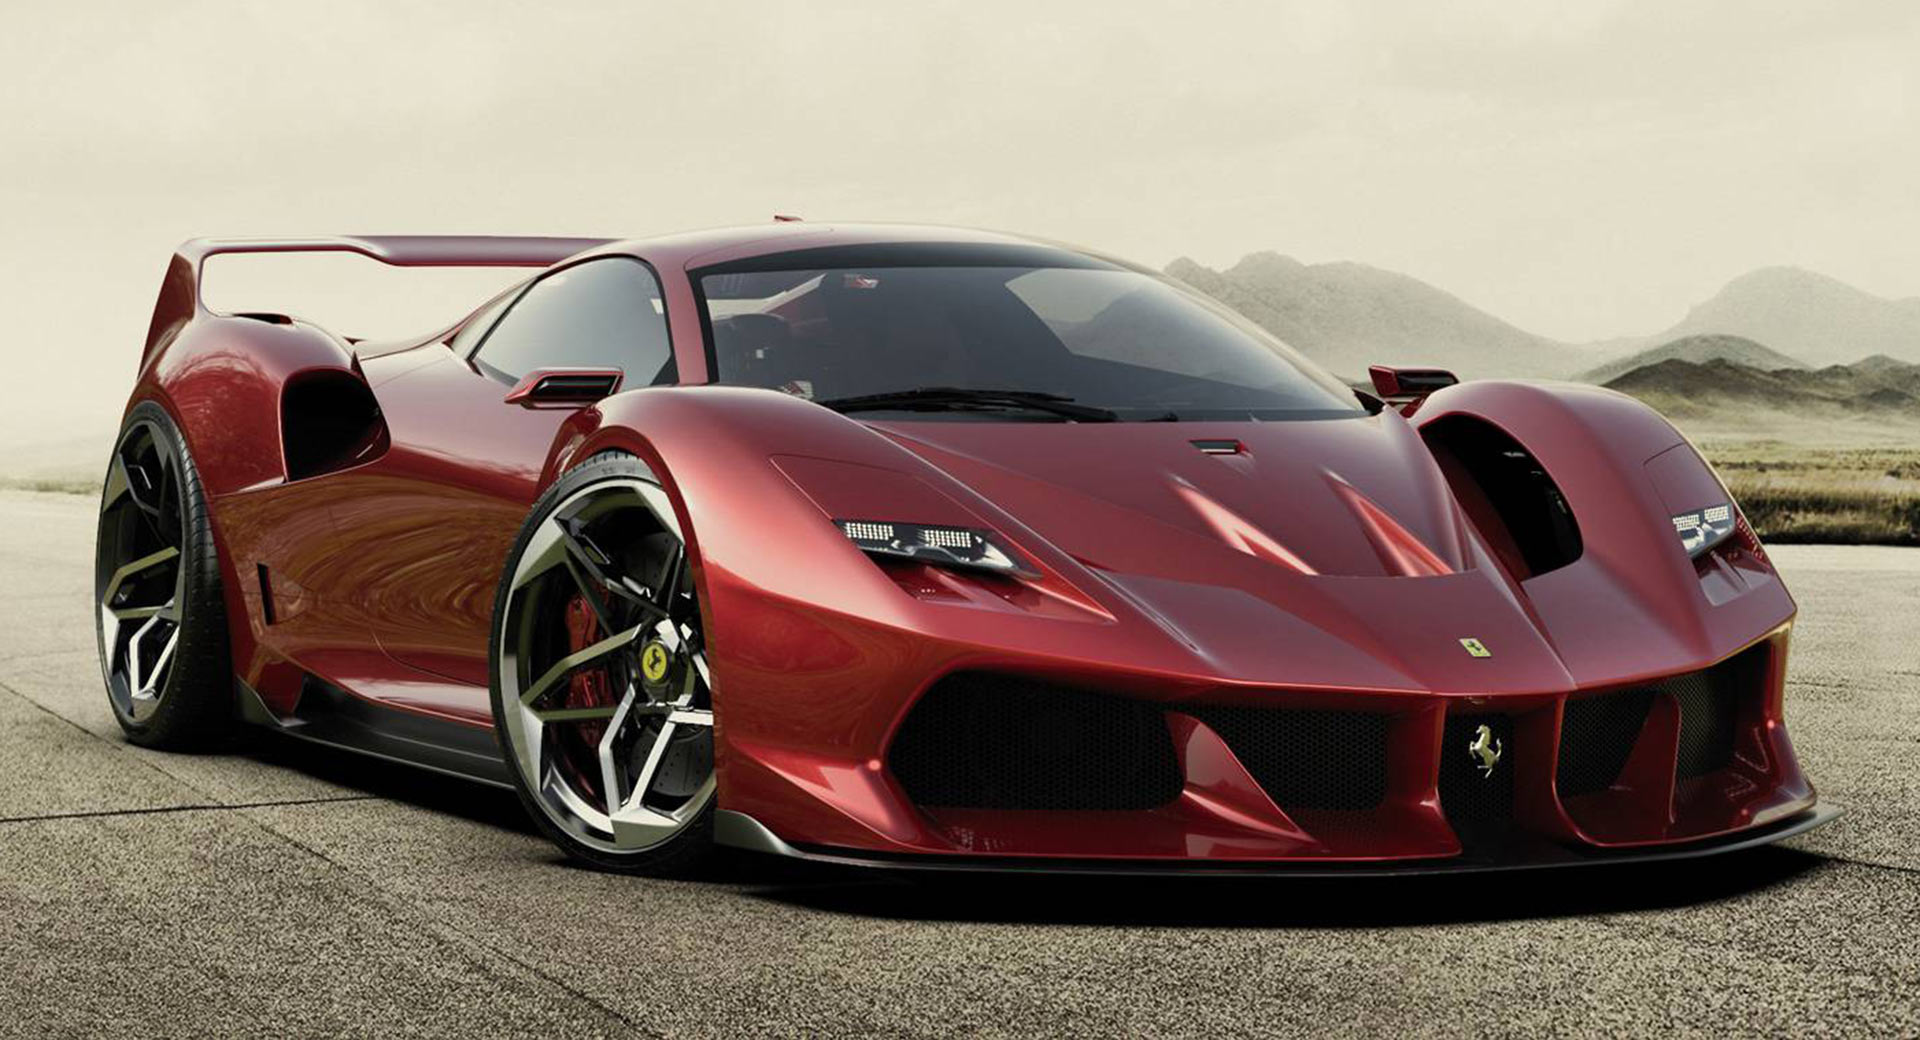 Ferrari May Soon Unveil A OneOff Special Project Inspired By The F40